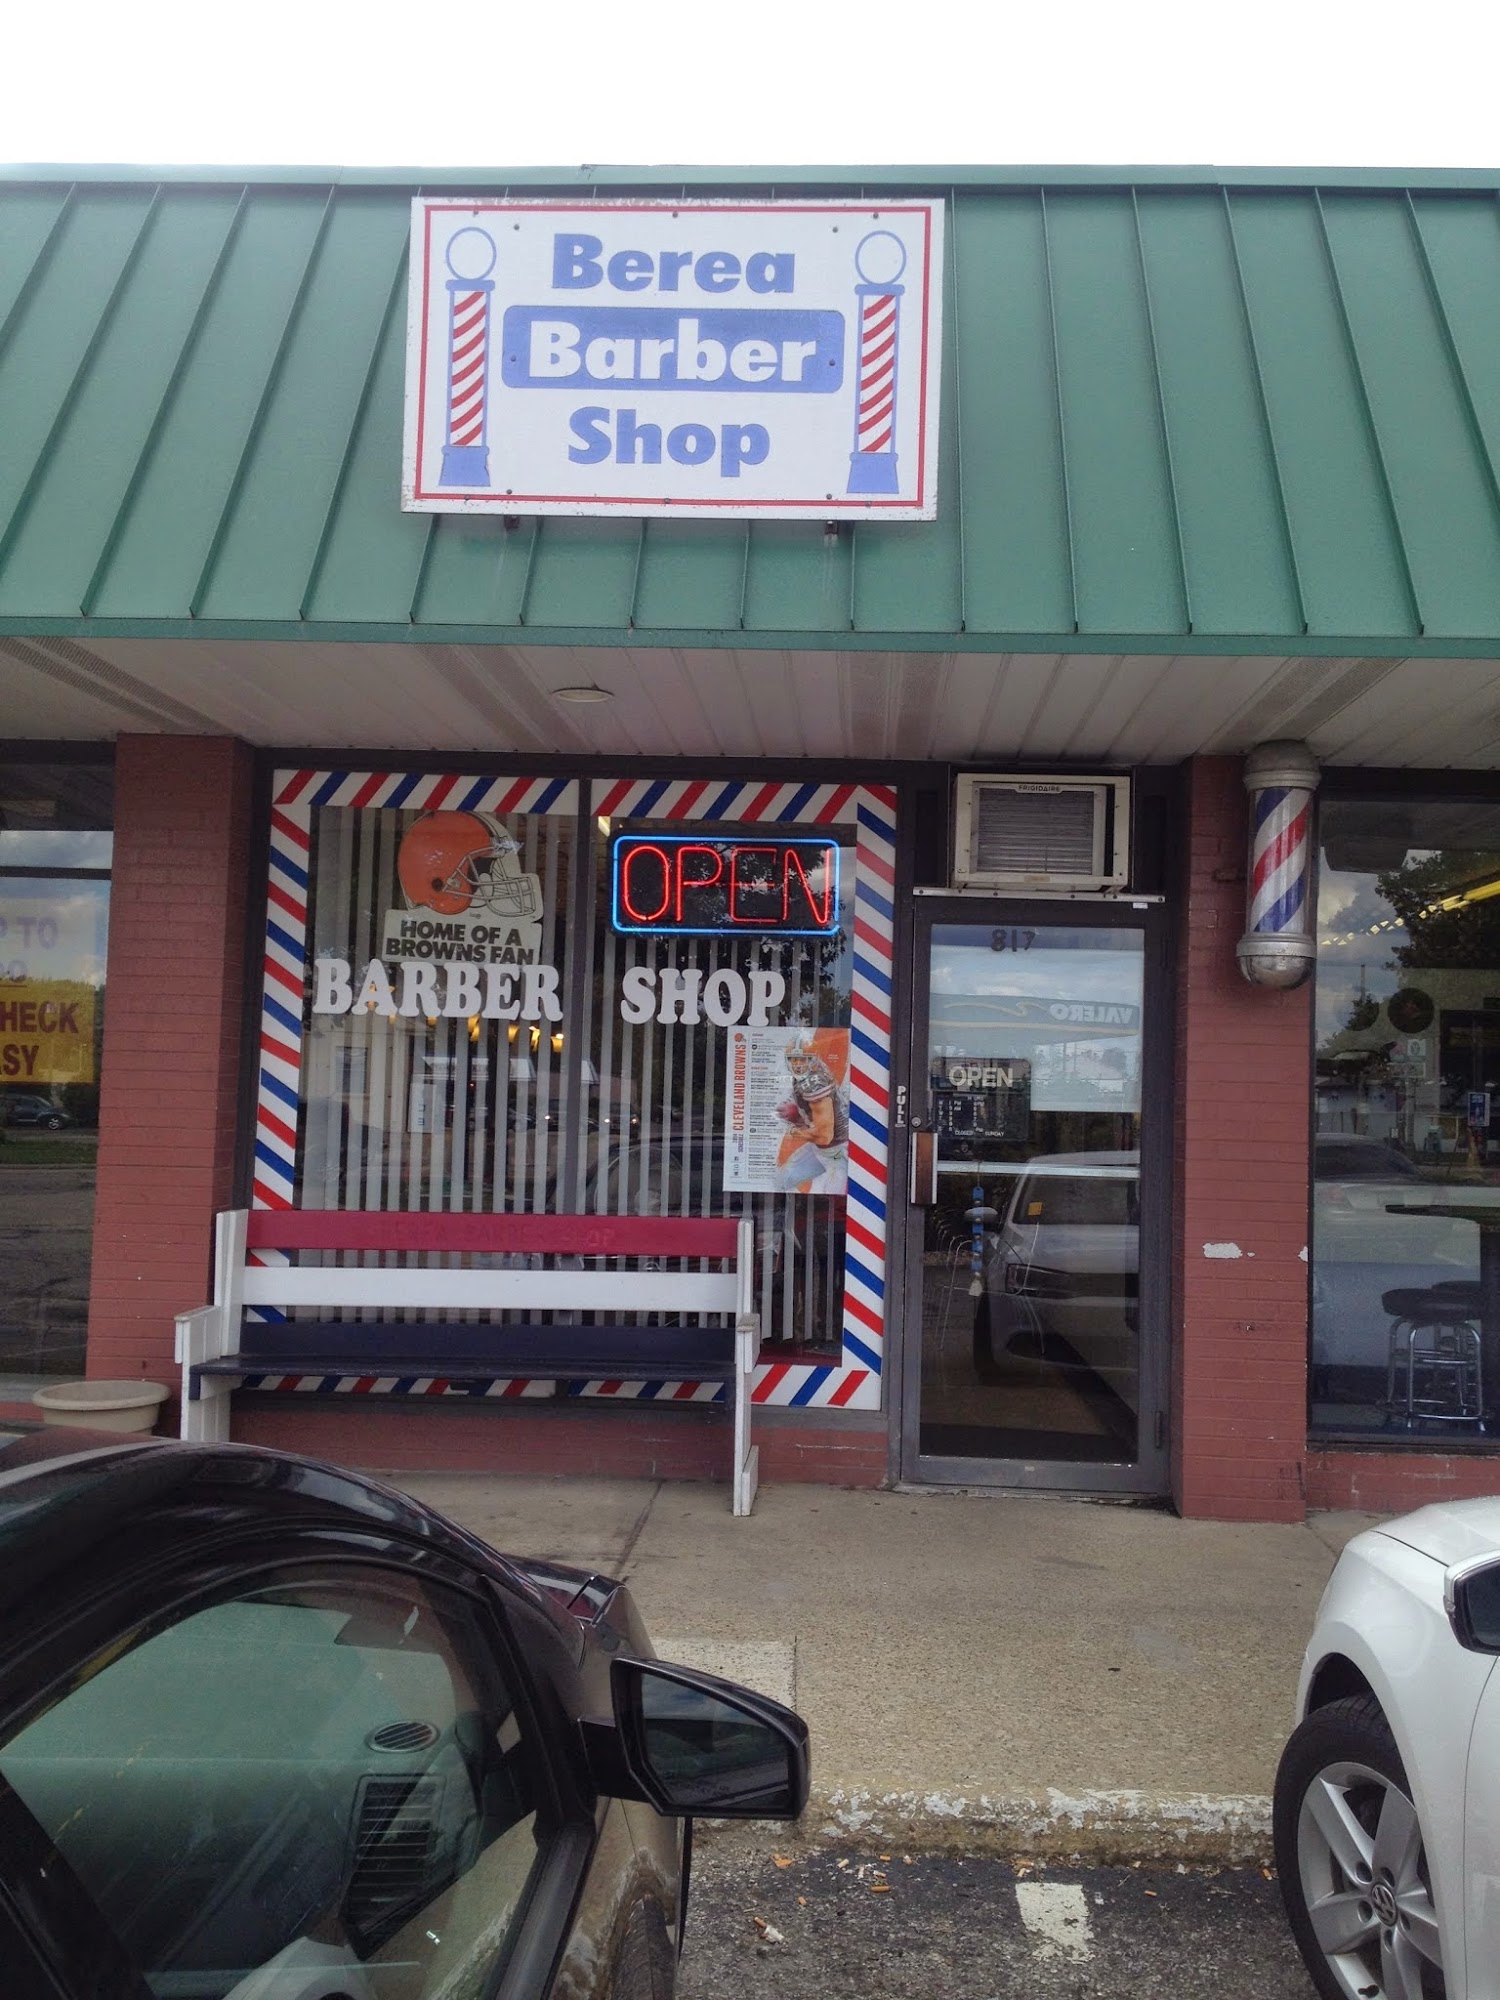 Knights of the Razor Barber Lounge